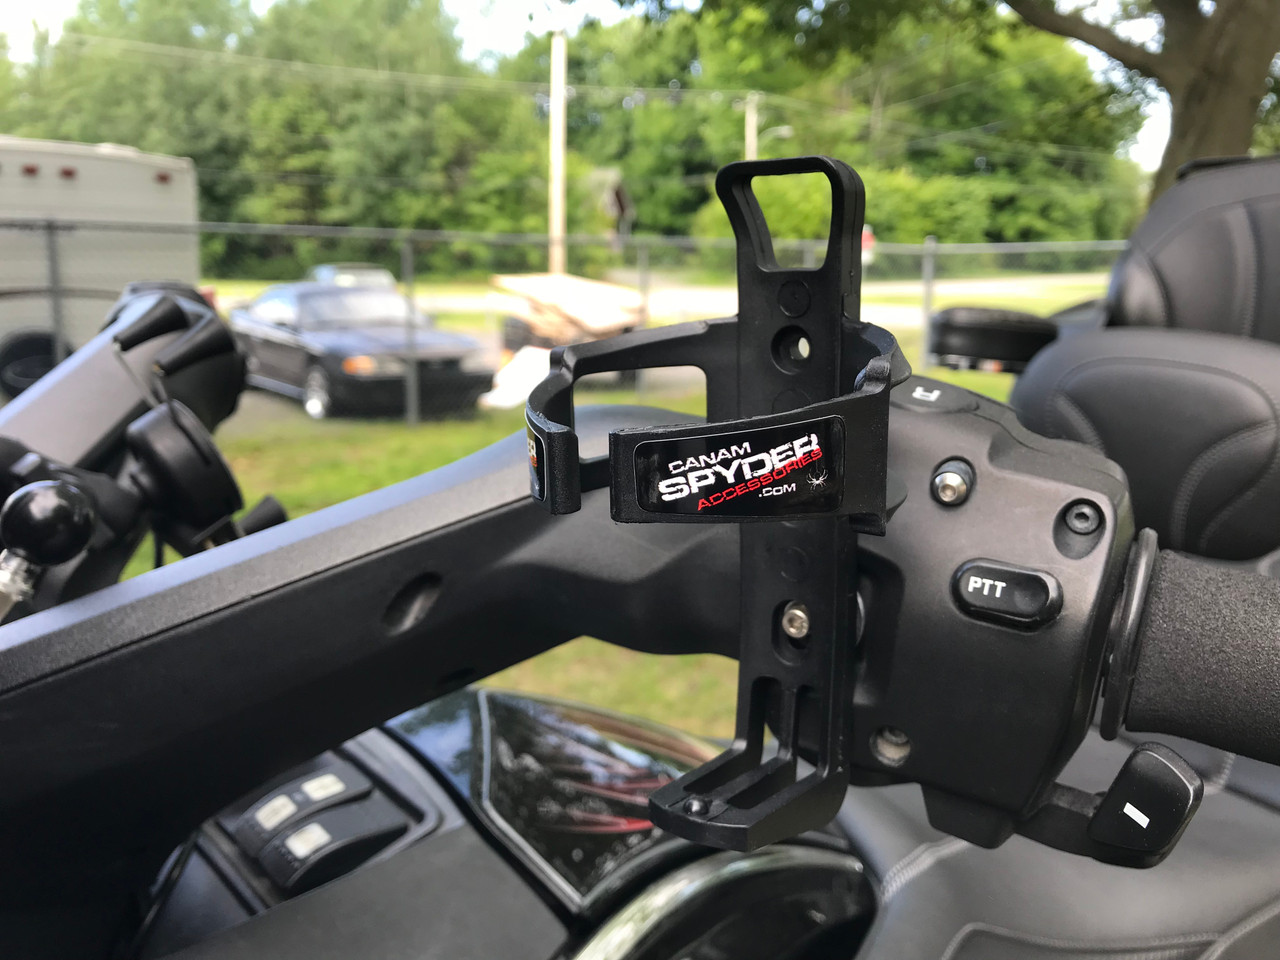 2 Cup Holders for Can-Am Spyder – 1 Spyder2Go Handlebar Mount & 1 Clamp Style Rear Handgrip Spyder Motorcycle Drink Holder – Flexes to Fit Cup Sizes